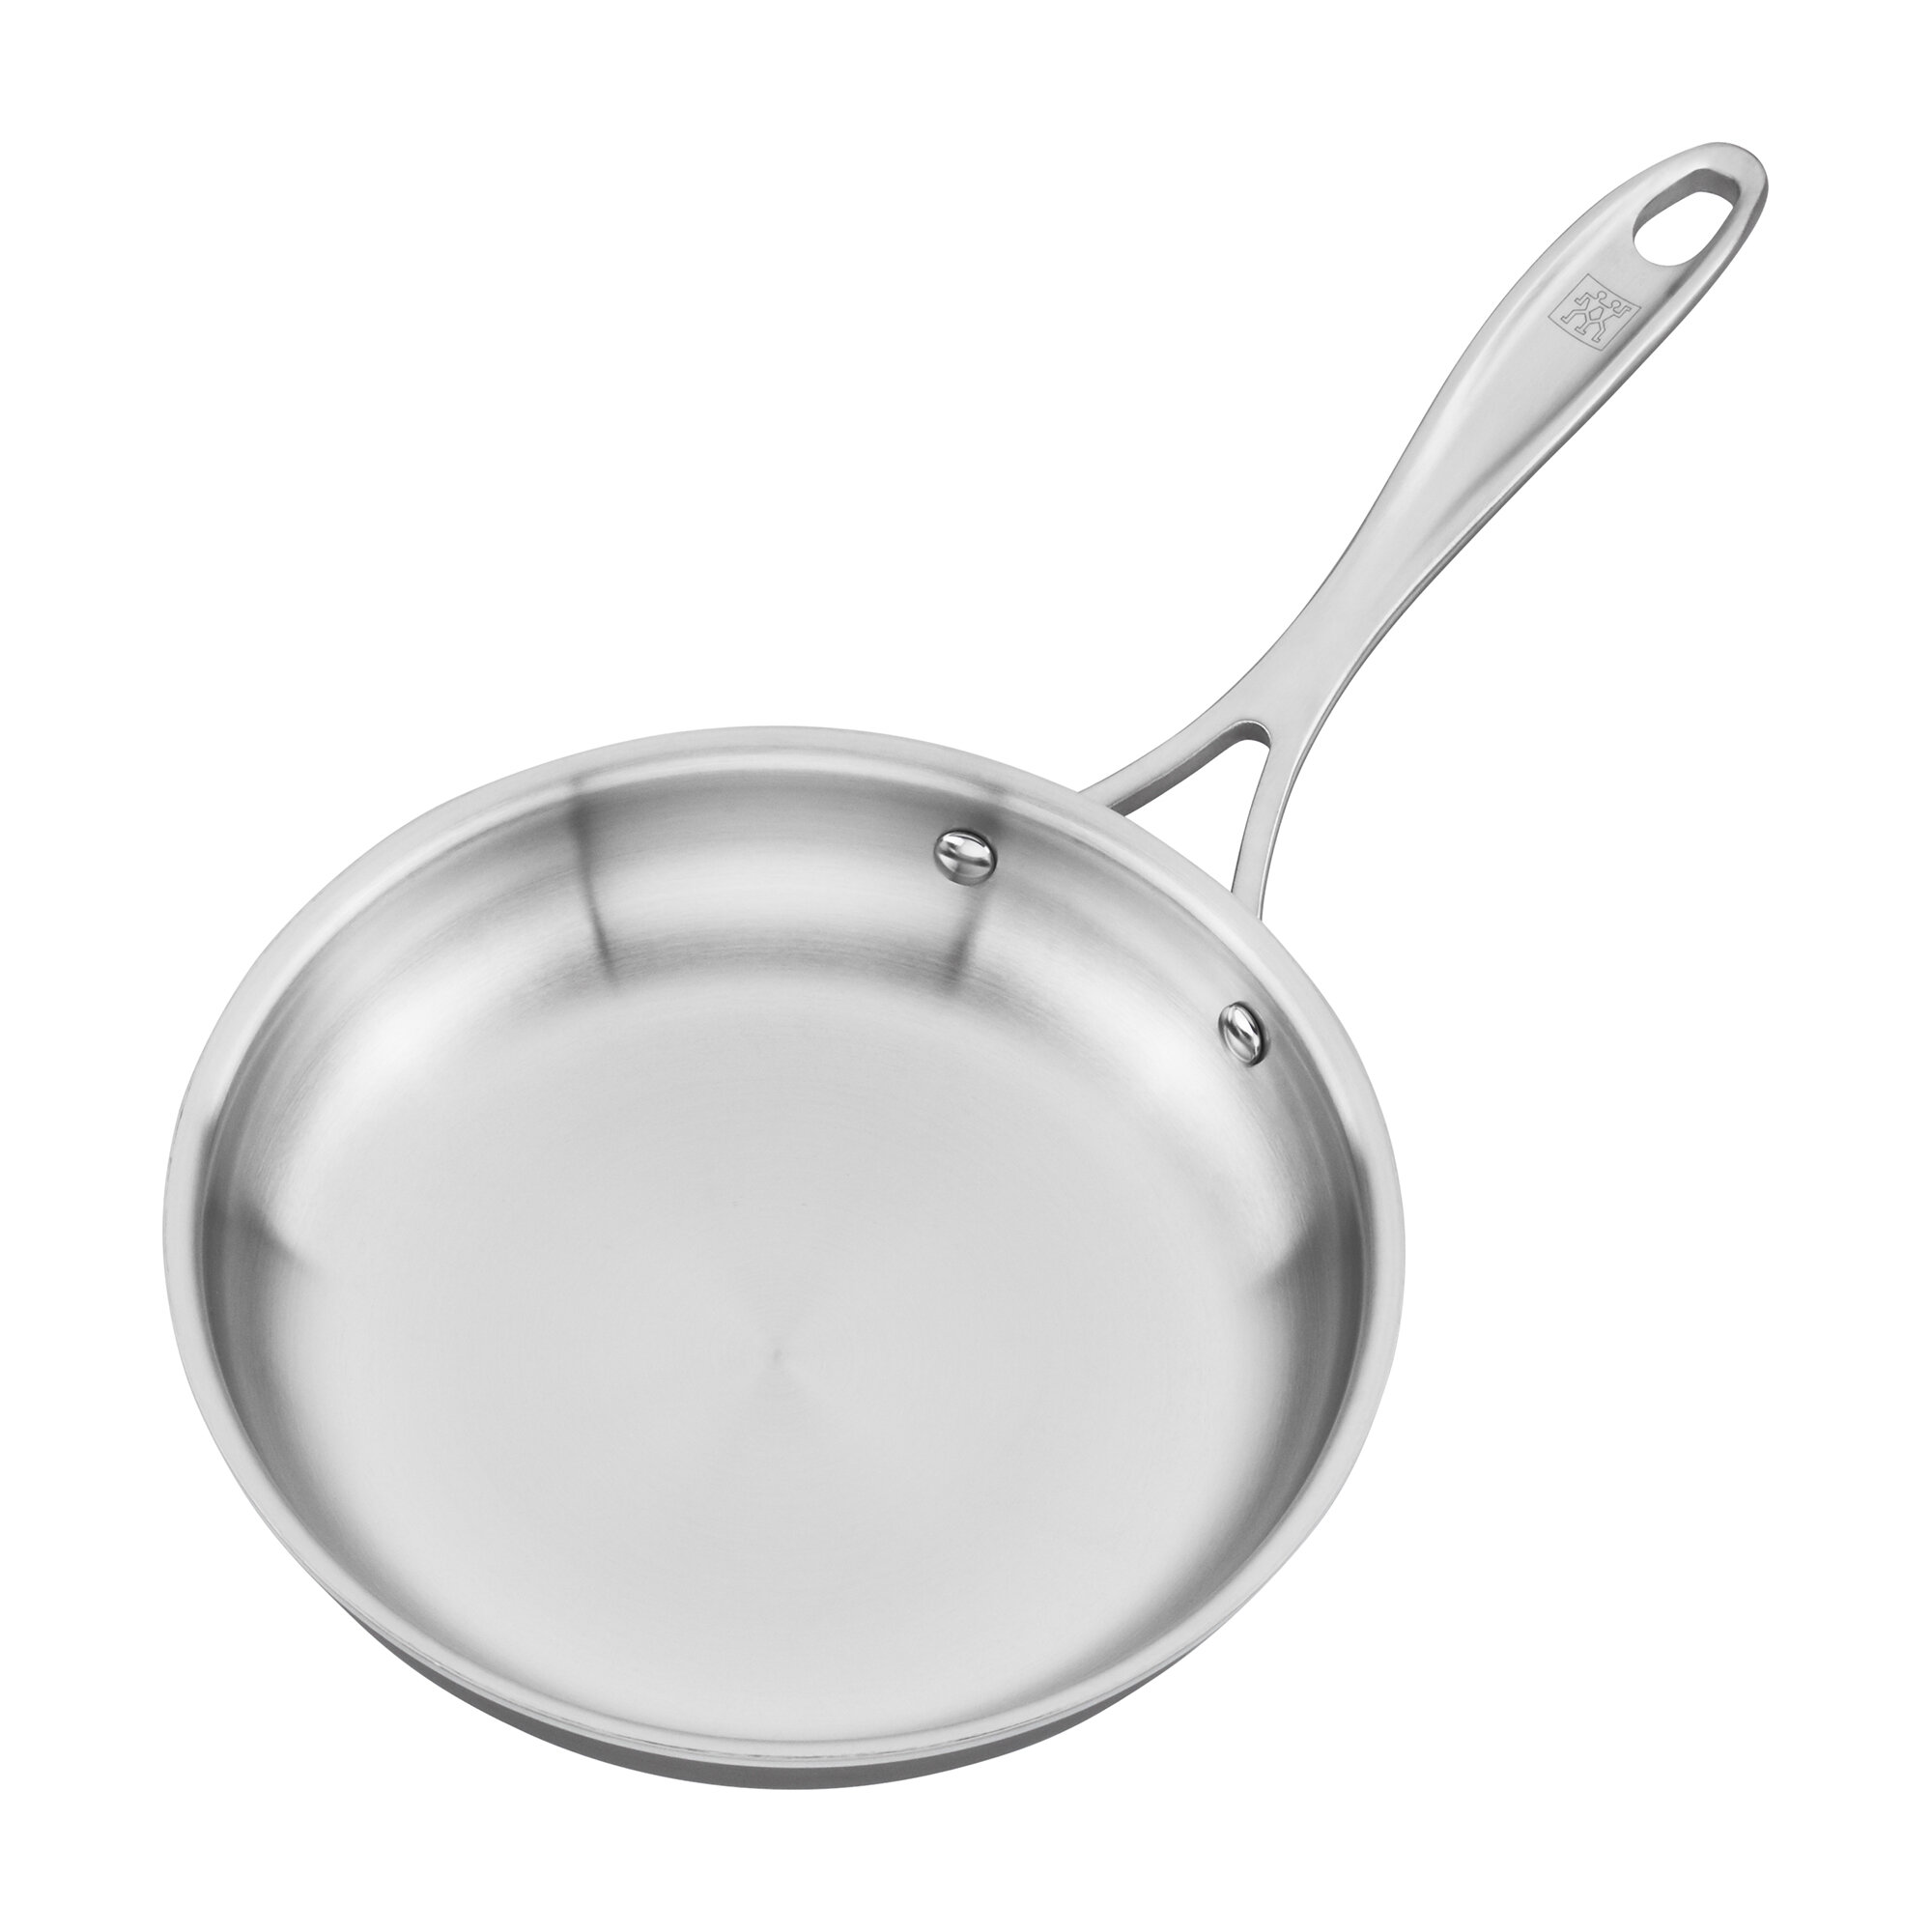 Zwilling Spirit 3-Ply 9.5-Inch Stainless Steel Ceramic Nonstick Fry Pan  With Lid